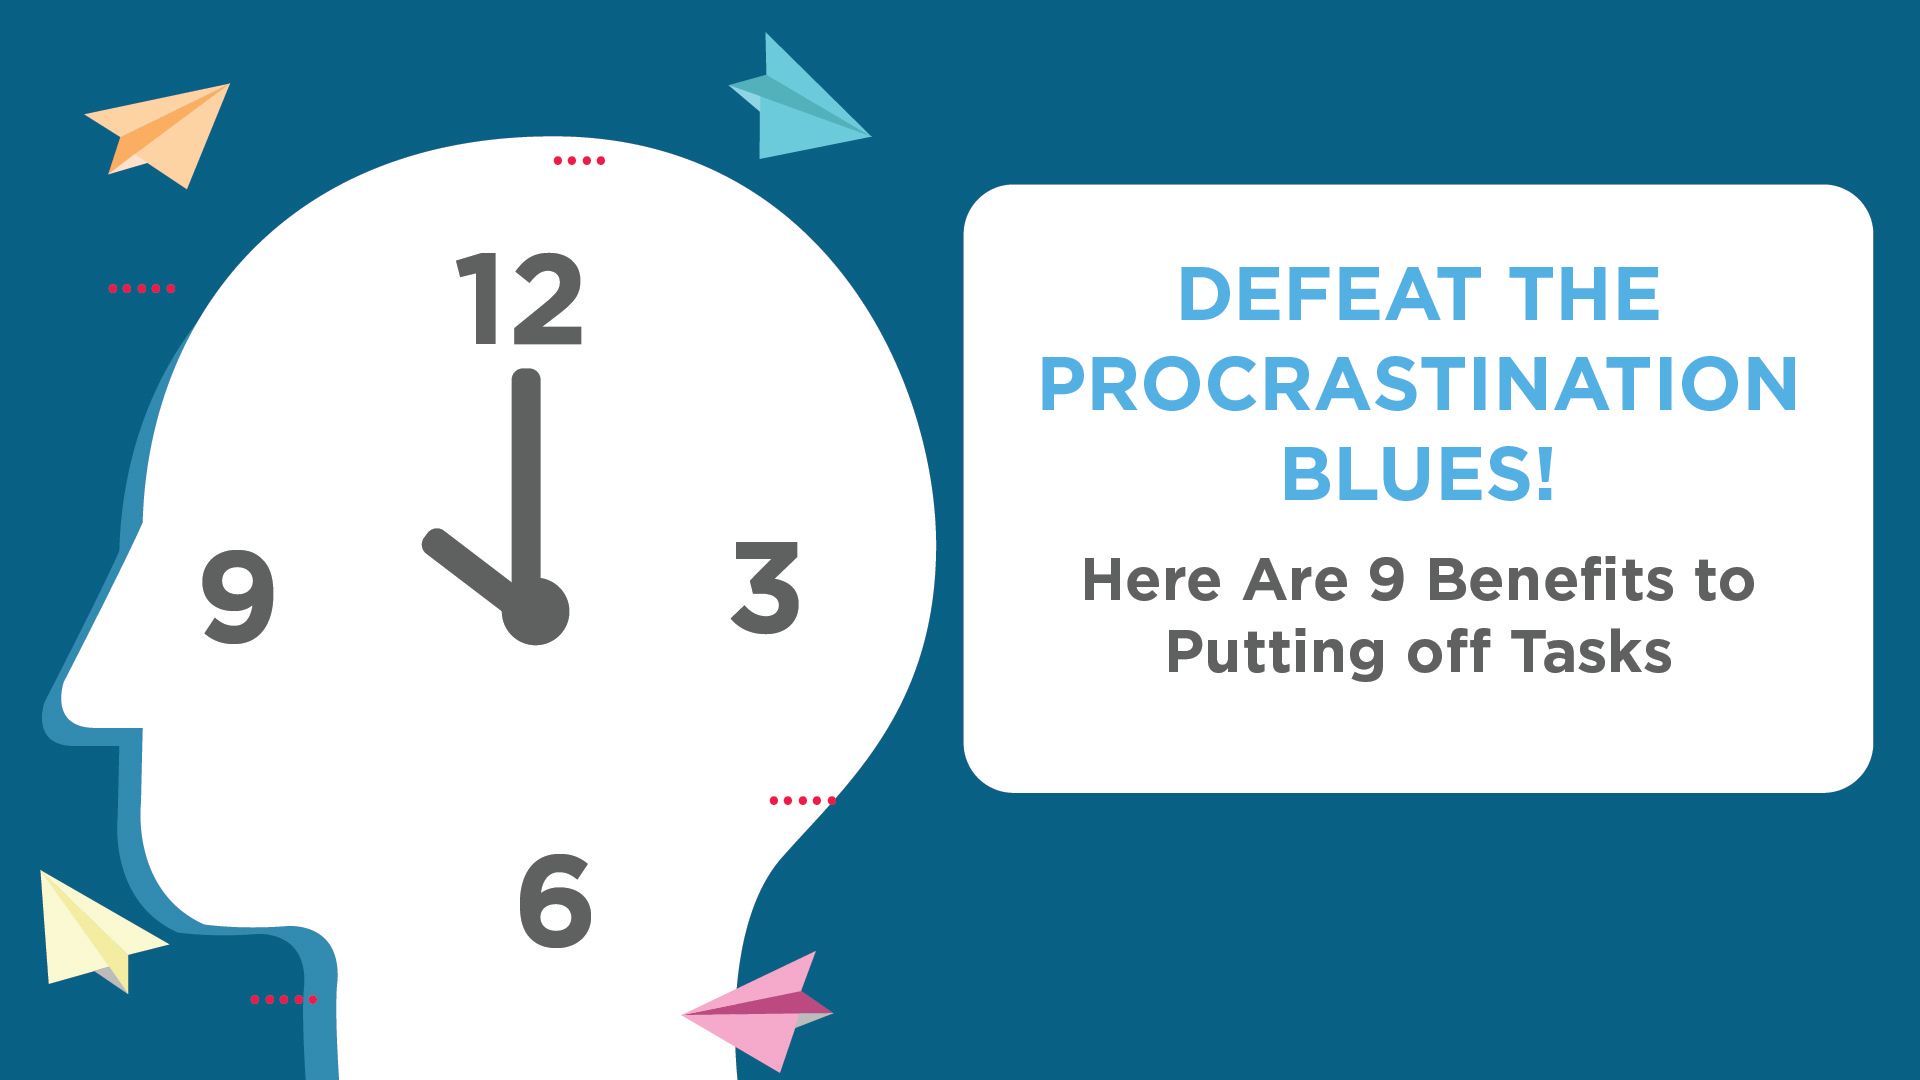 Defeat the procrastination blues! Here are 9 benefits to putting off tasks